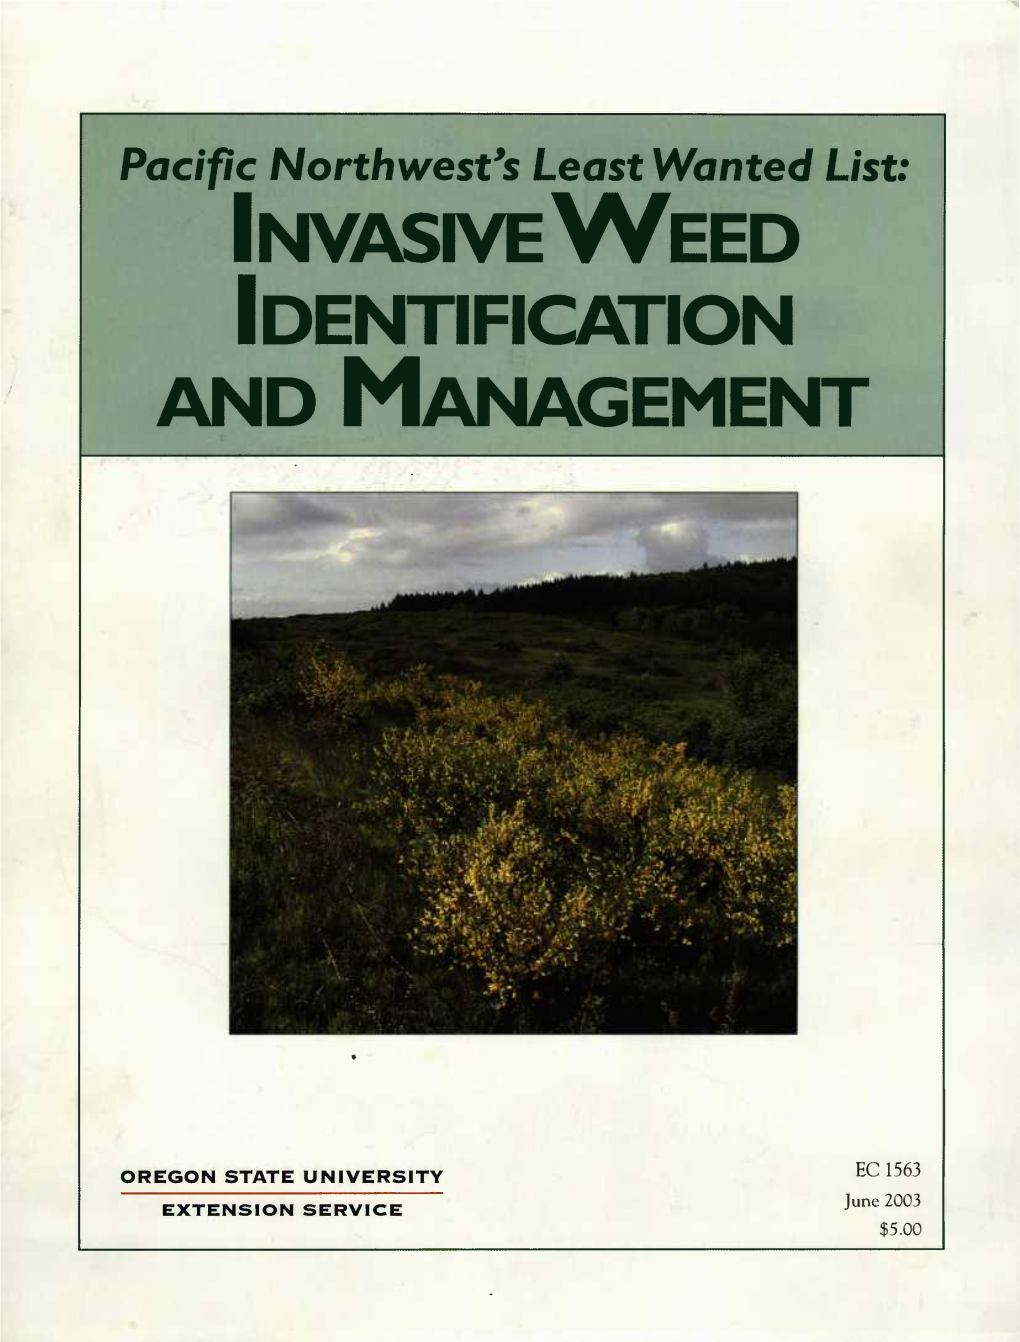 Invasive Weed Identification and Management